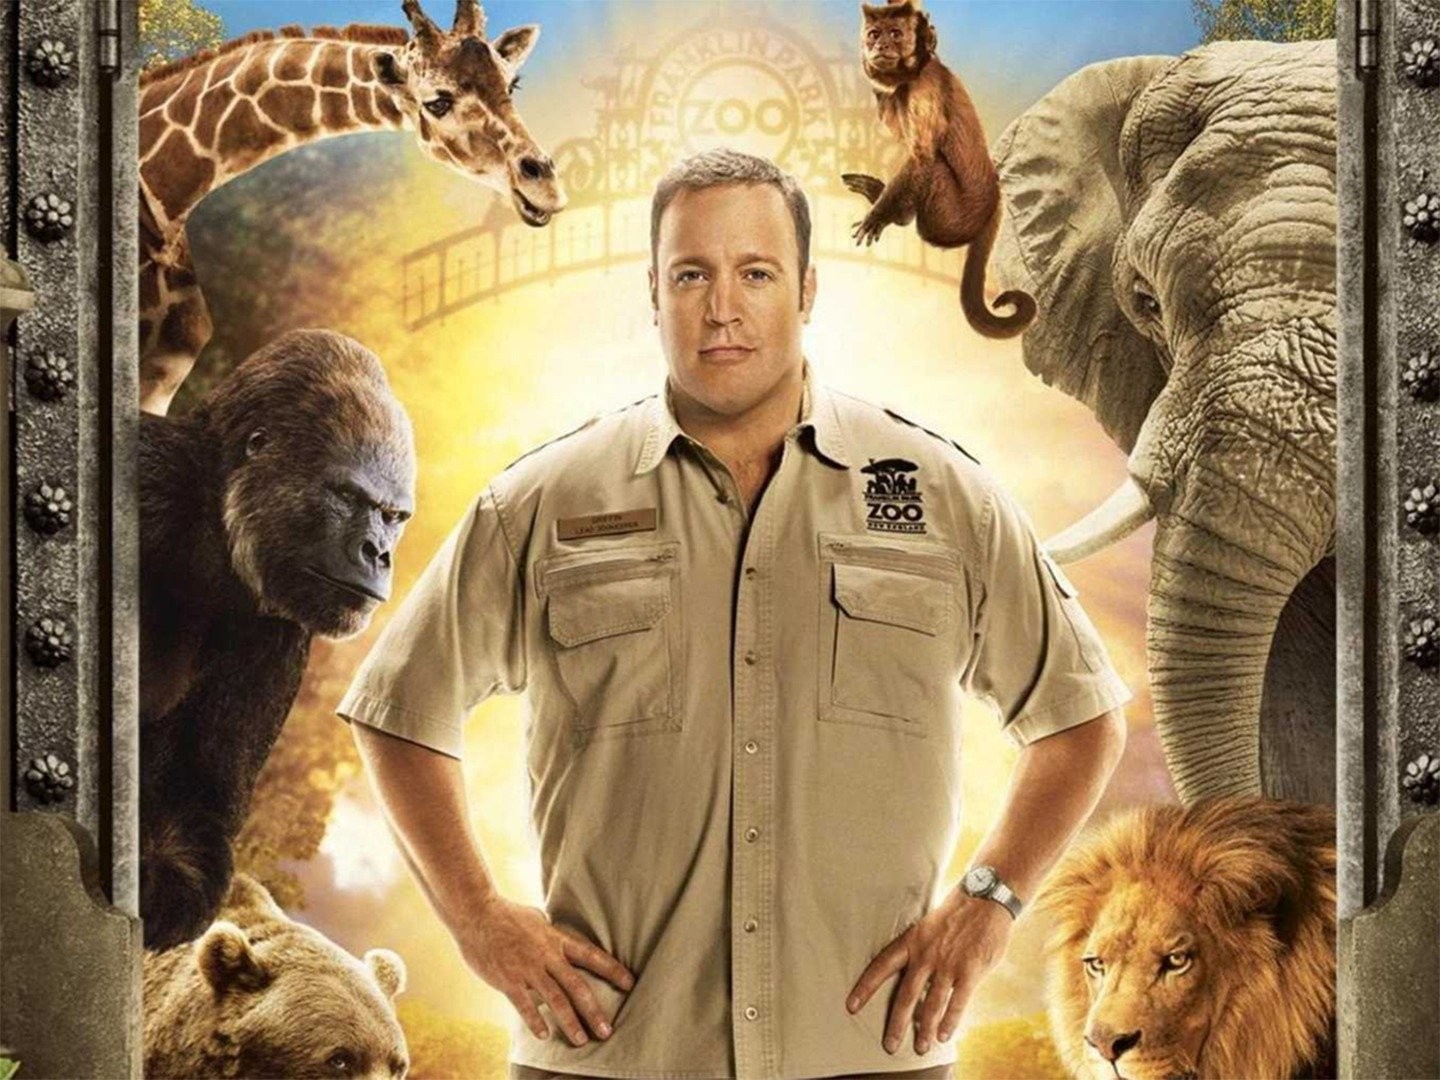 kevin james zookeeper